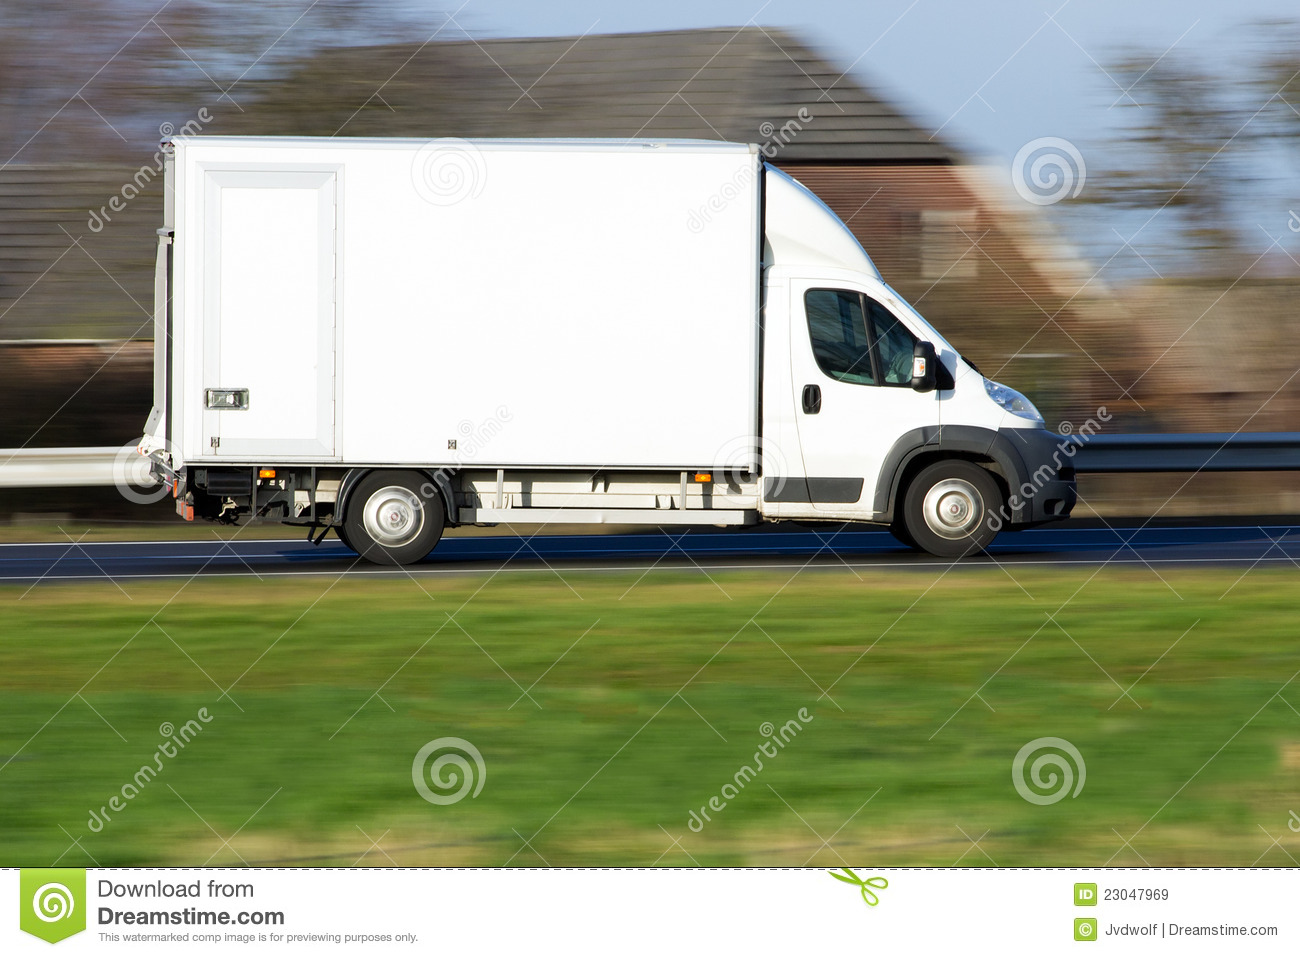 Speeding Delivery Van Royalty Free Stock Images   Image  23047969